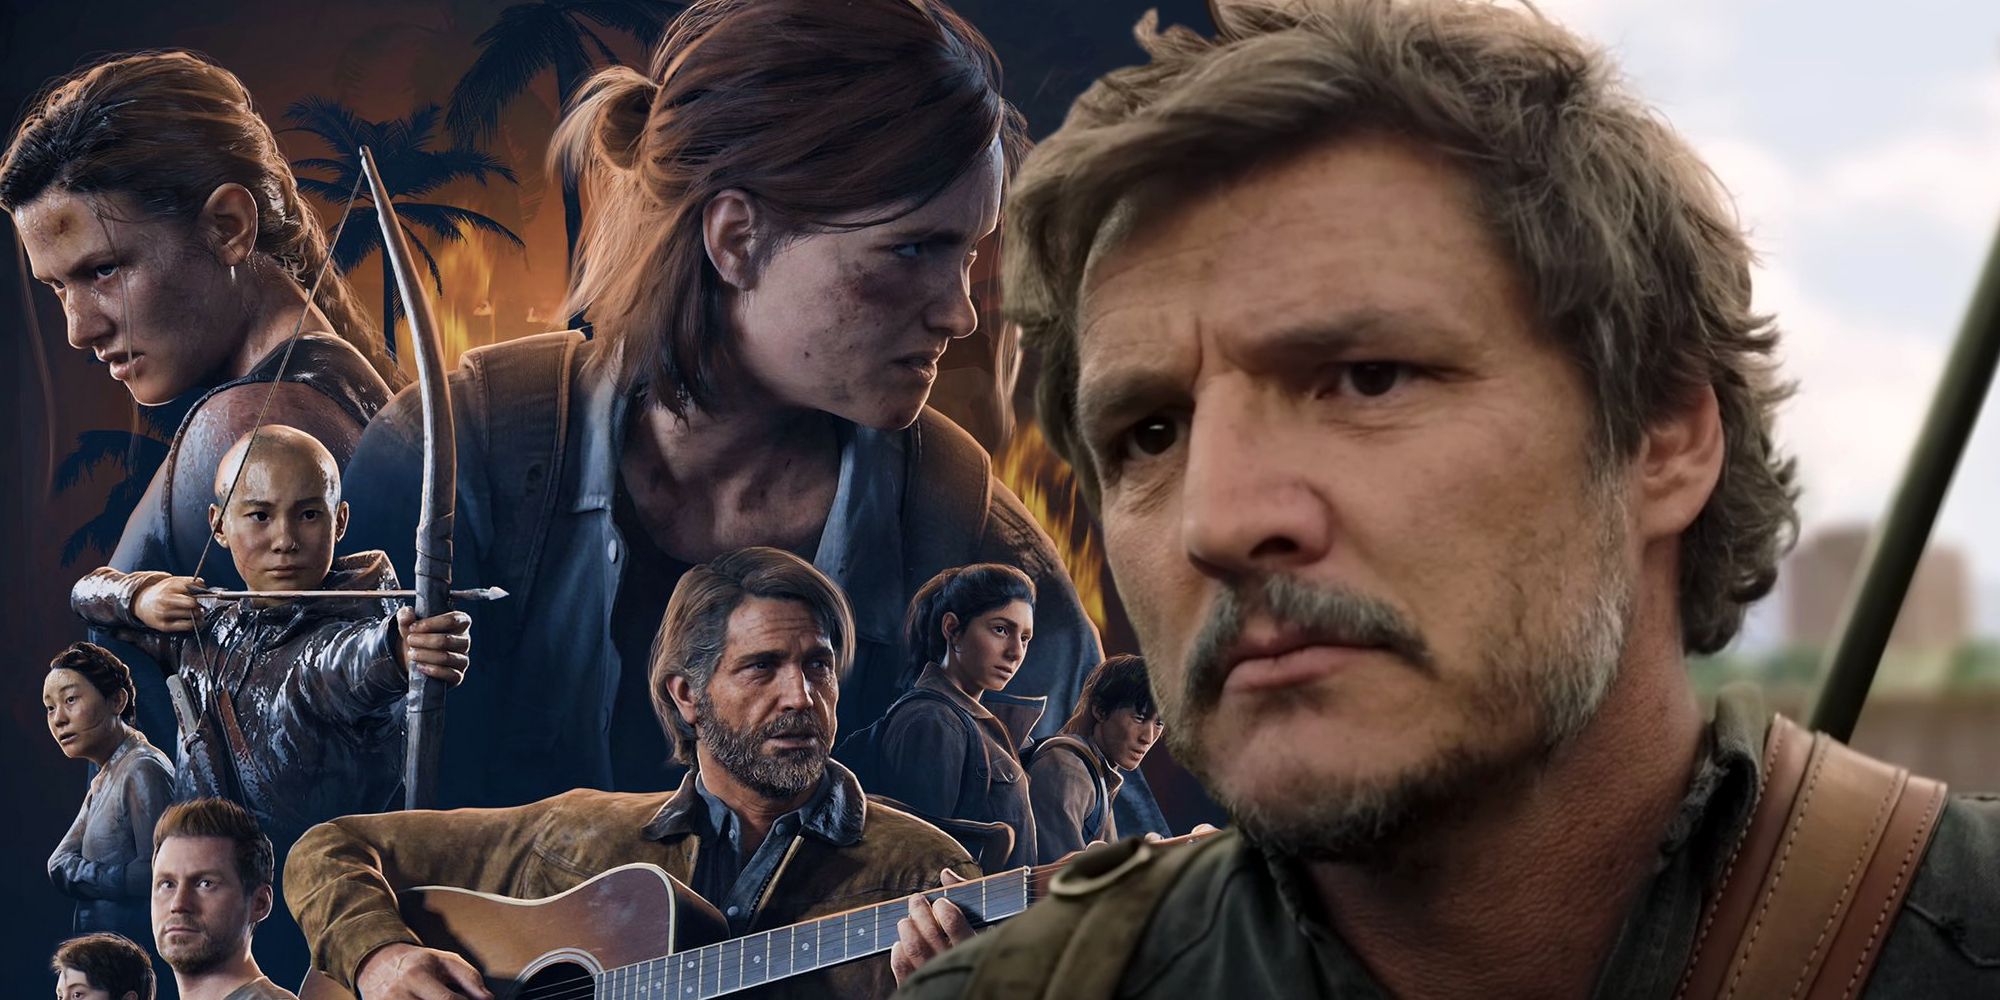 Joel from The Last of Us episode 9 and the poster for The Last of Us Part II